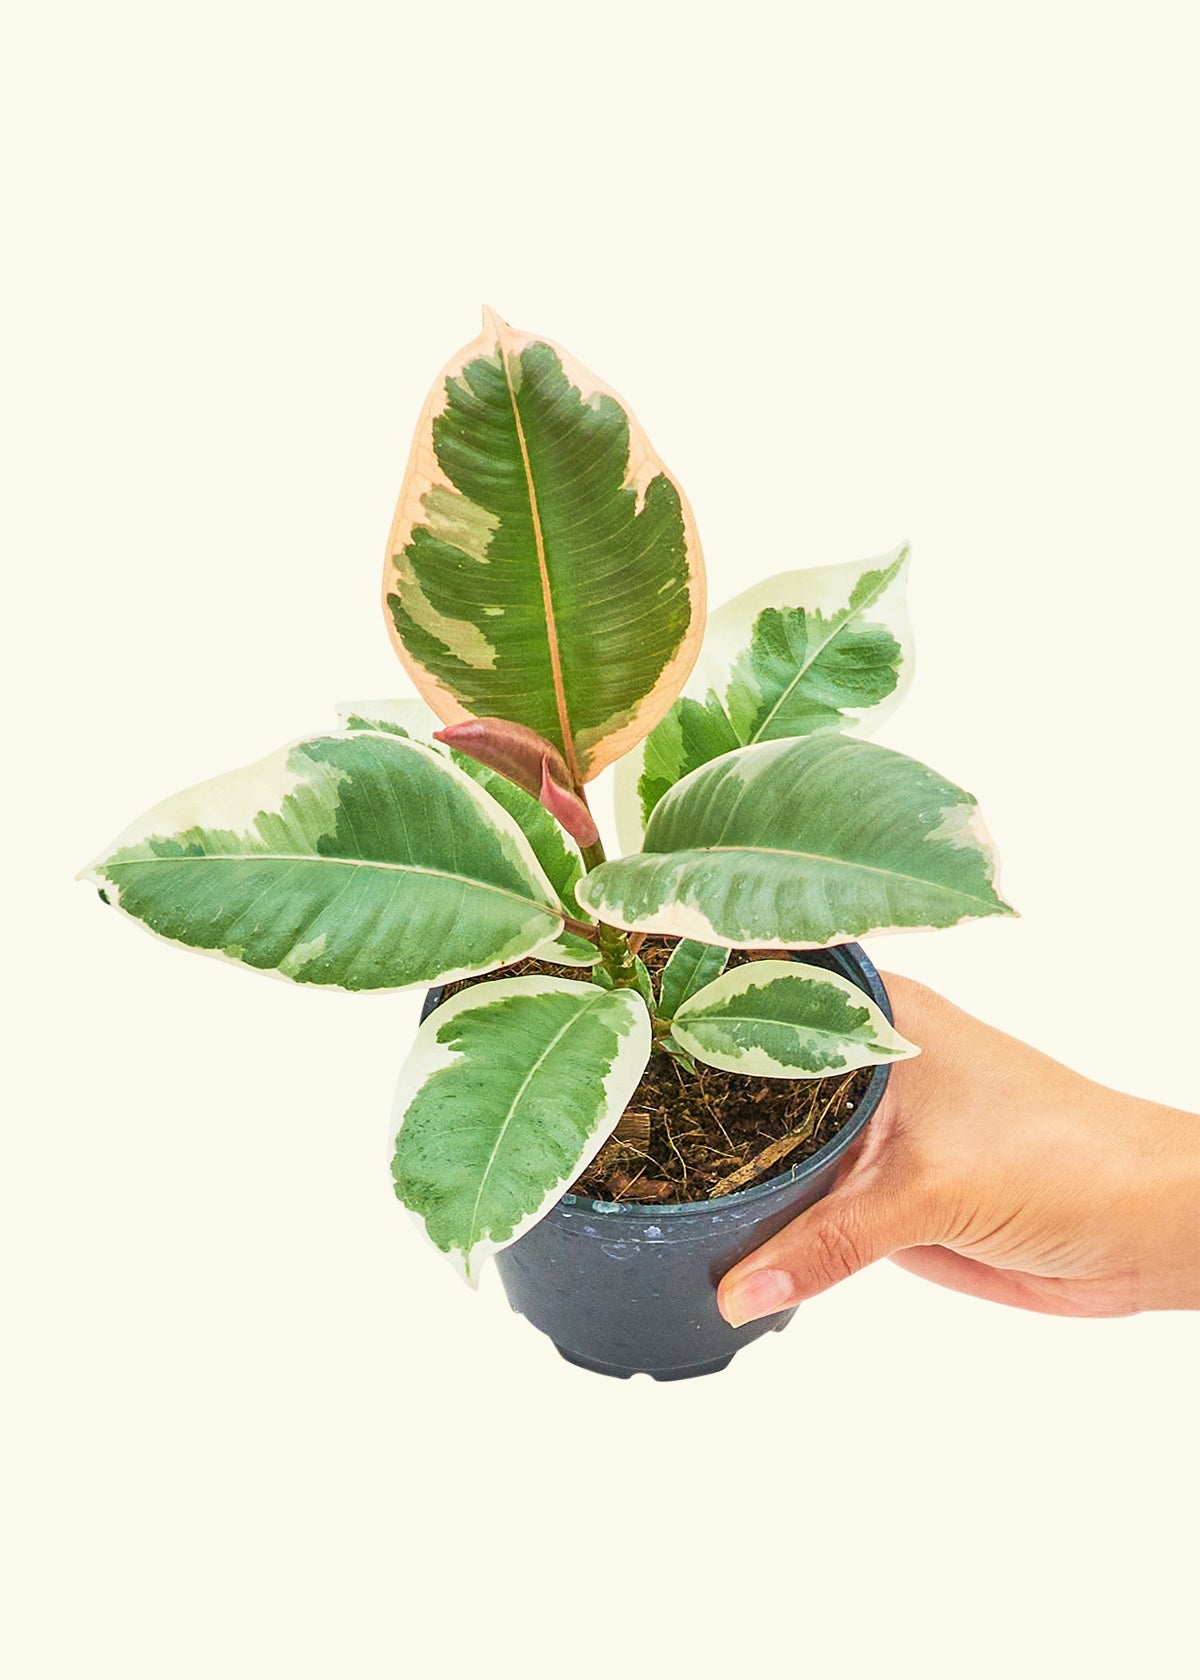 Small Ruby Rubber Tree (Ficus elastica 'Ruby') in a grow pot.